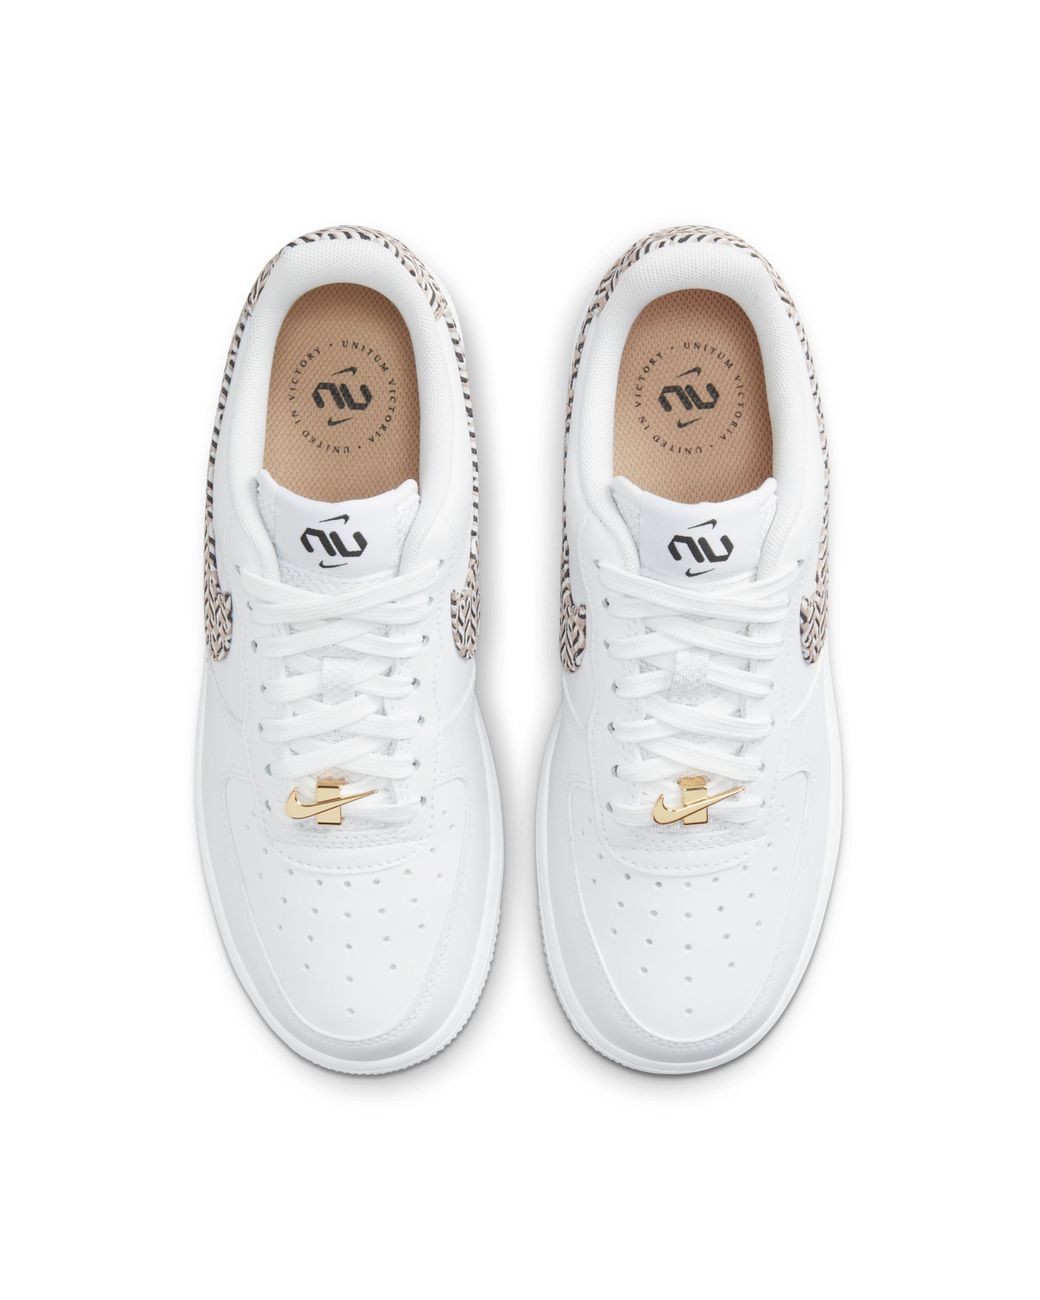 Nike Air Force 1 Lx United Shoes in White